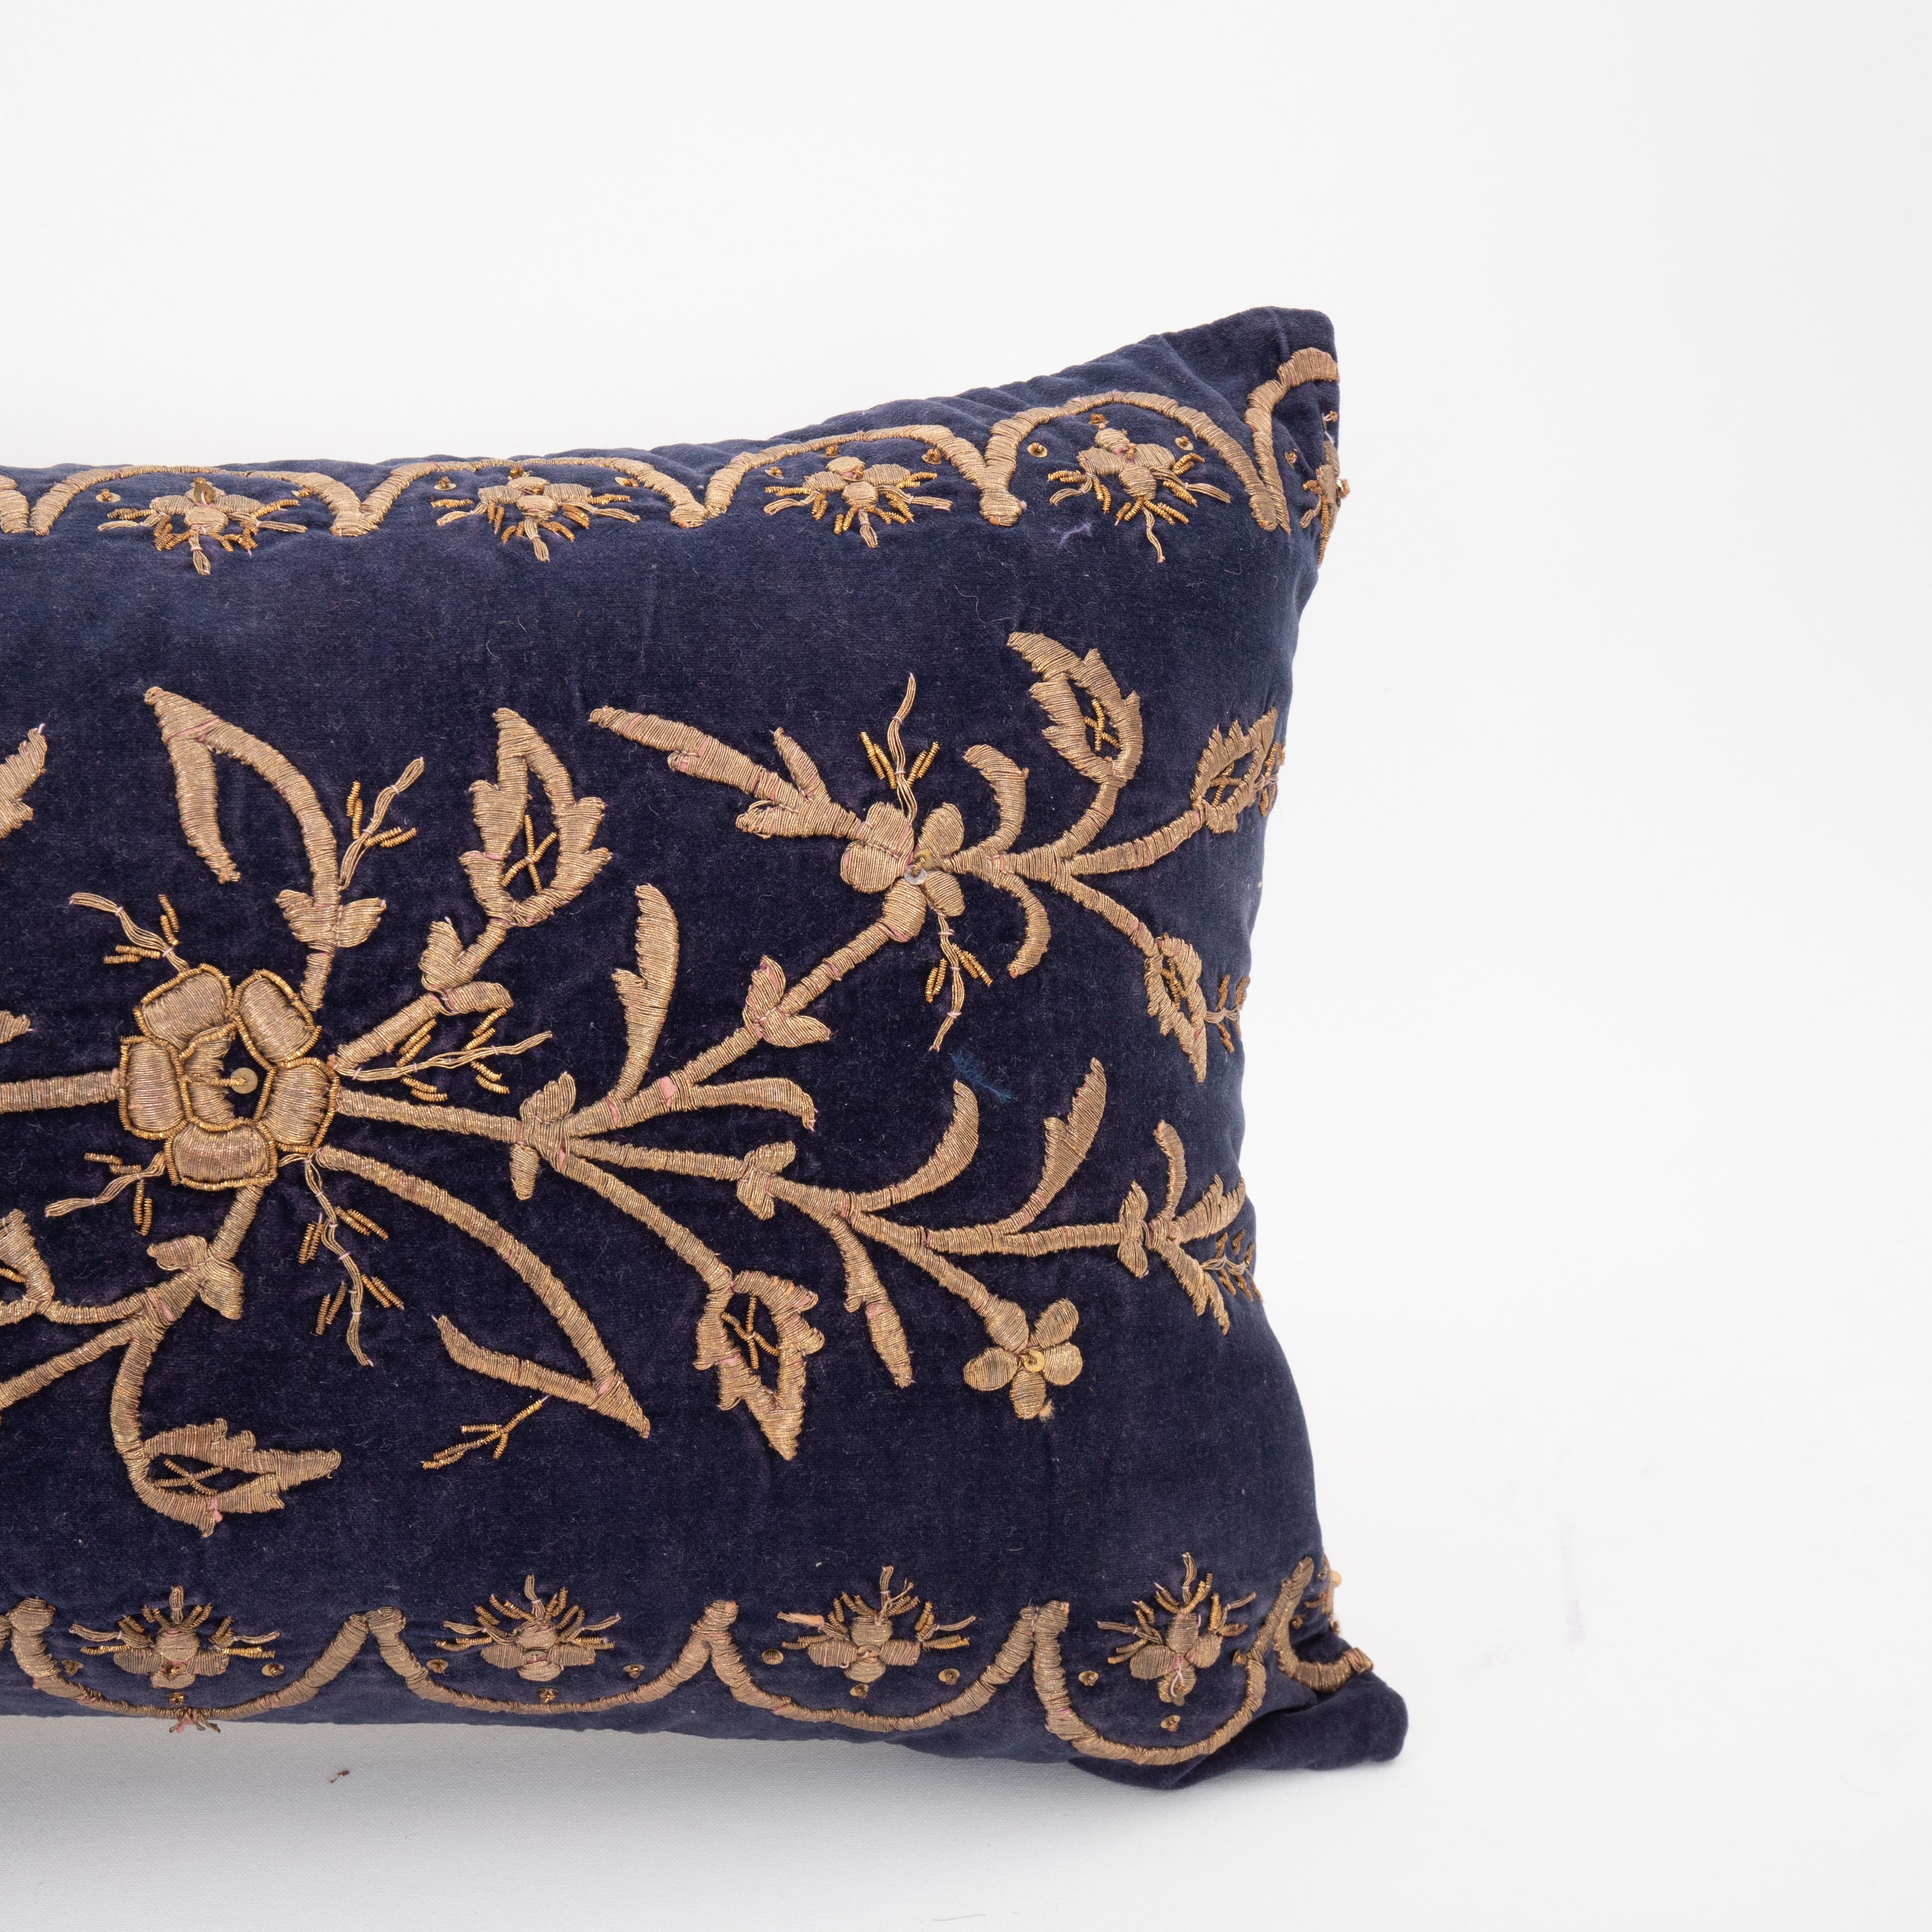 19th Century Ottoman / Turkish Pillow Cover in Sarma Technique, late 19th / Early 20th C. For Sale